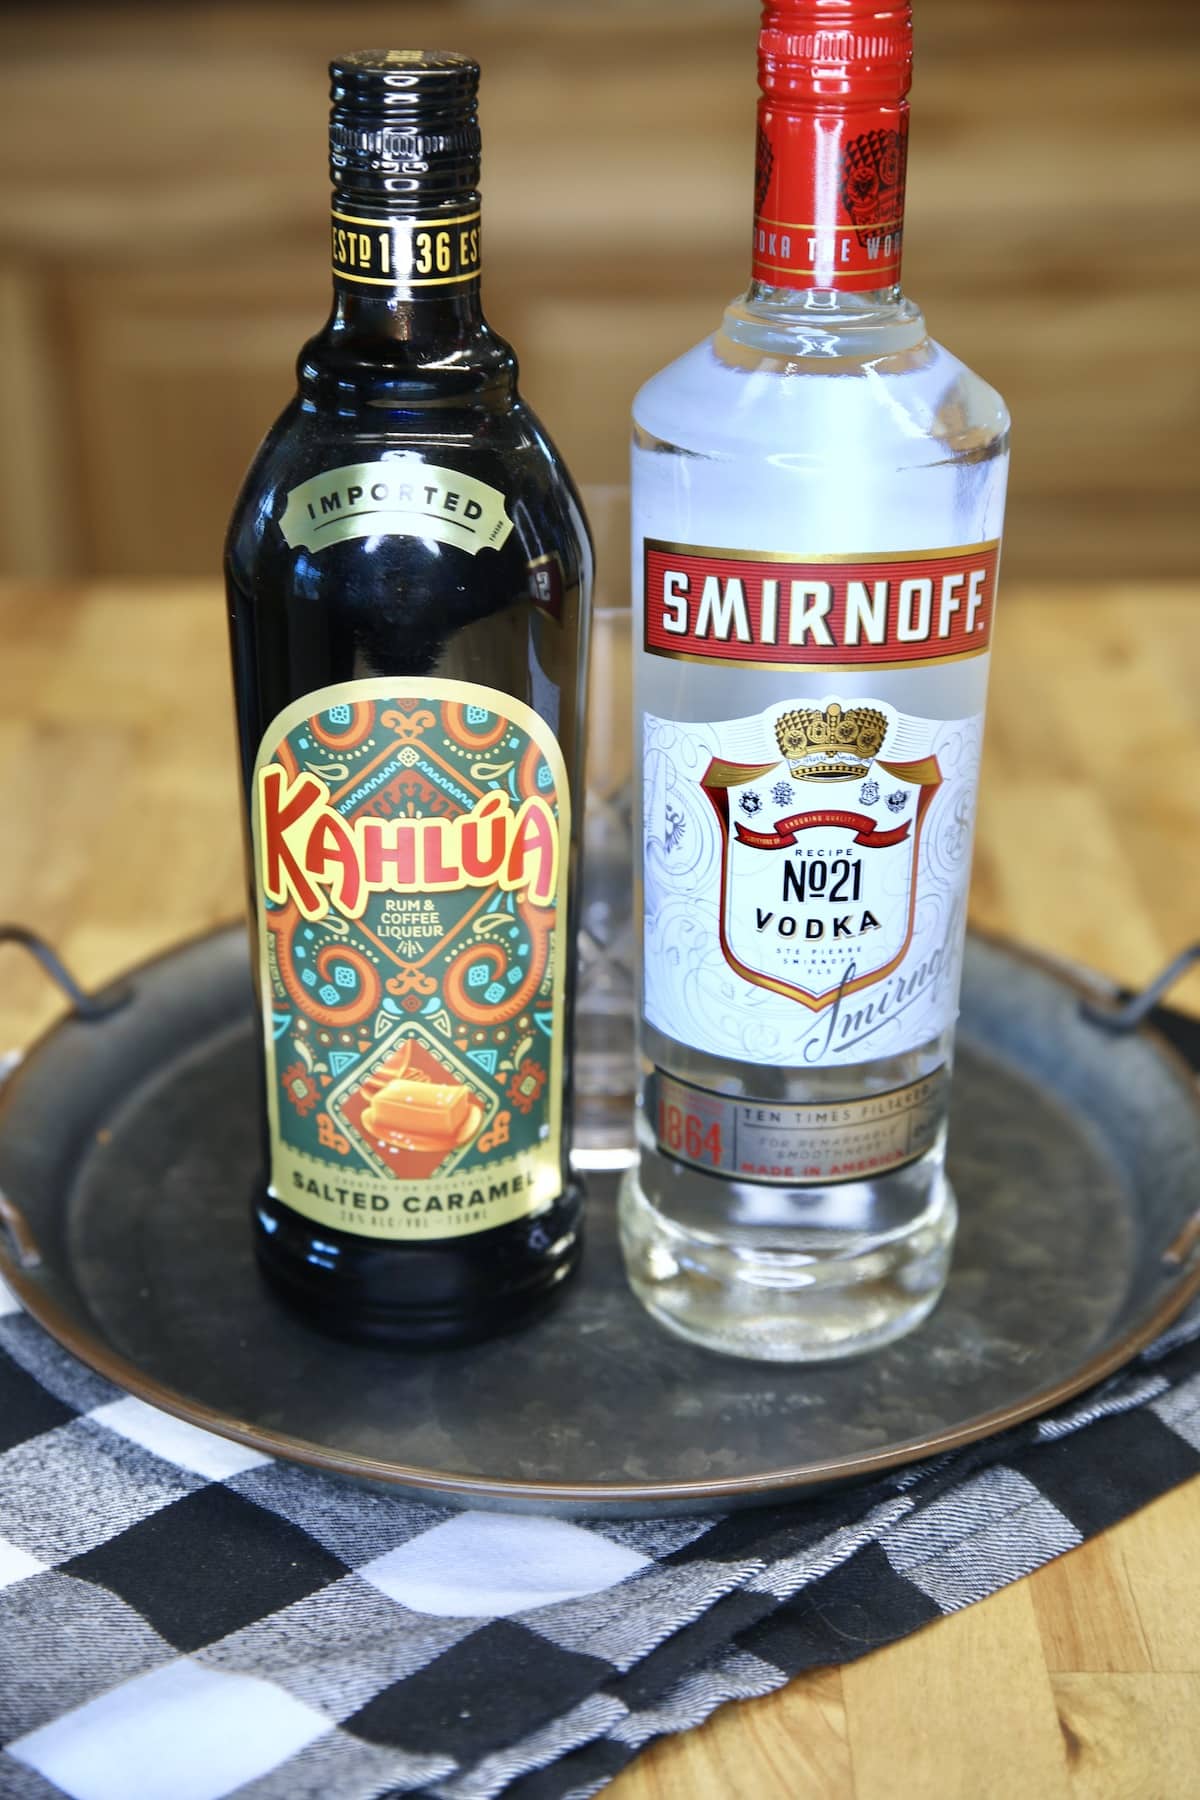 Bottle of Kahlua and bottle of vodka on a tray.